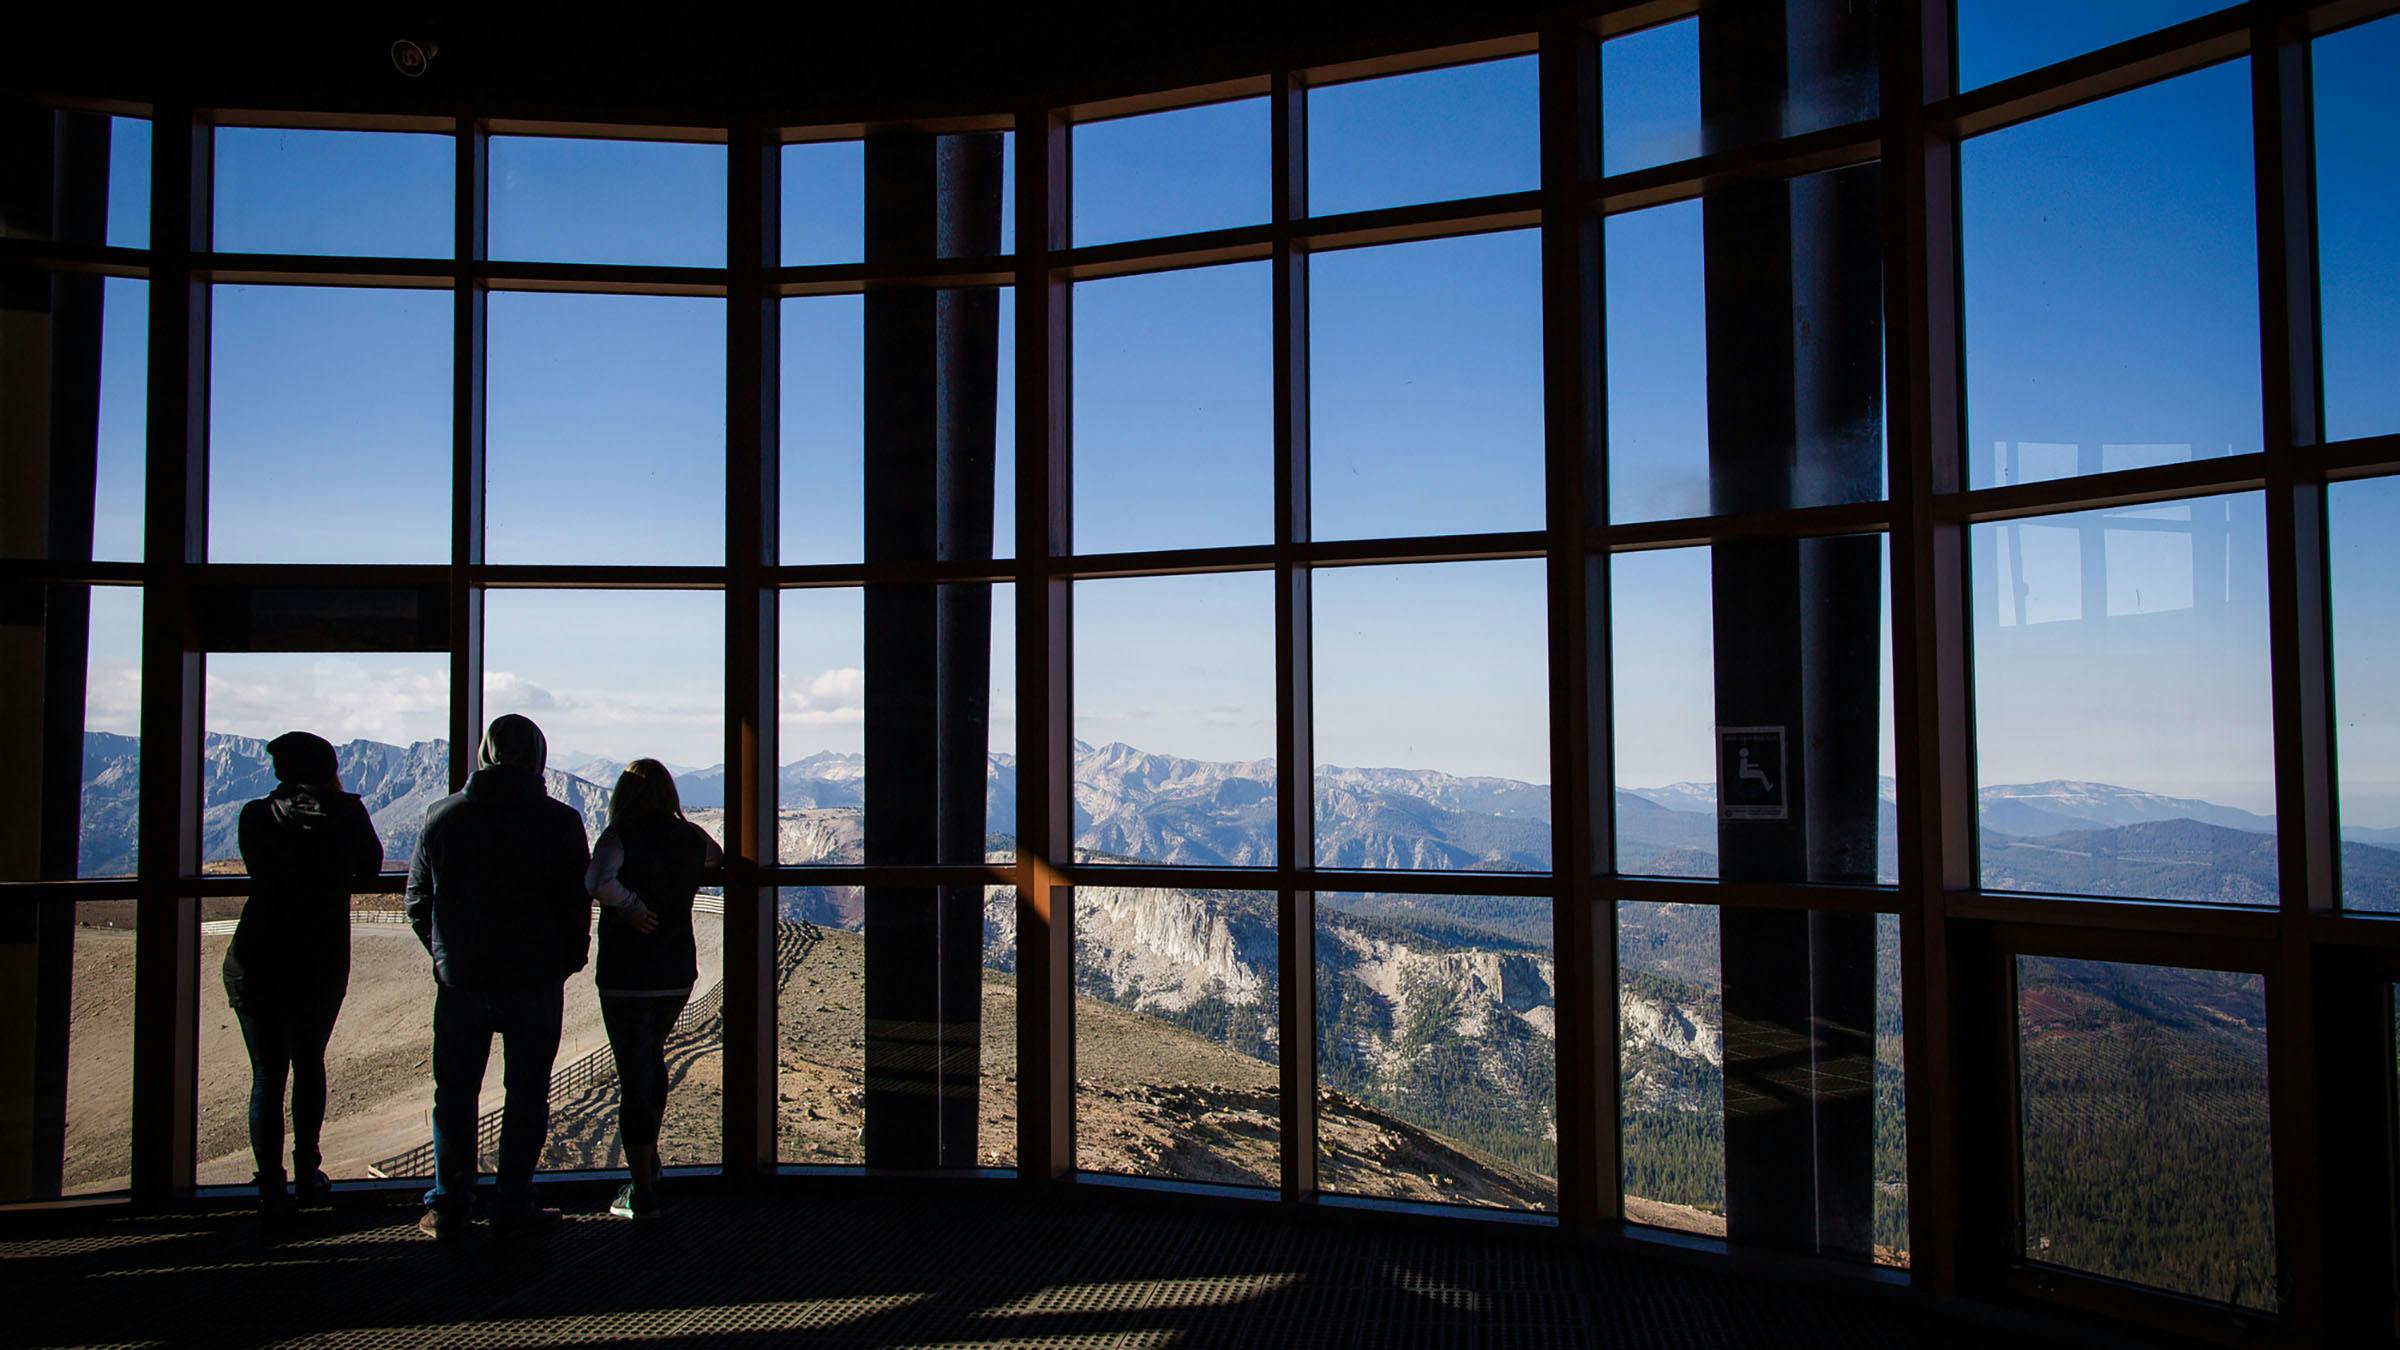 Silhouette of guests looking out the windows at the Eleven53 Interpretive Center on the summit of Mammoth Mountain